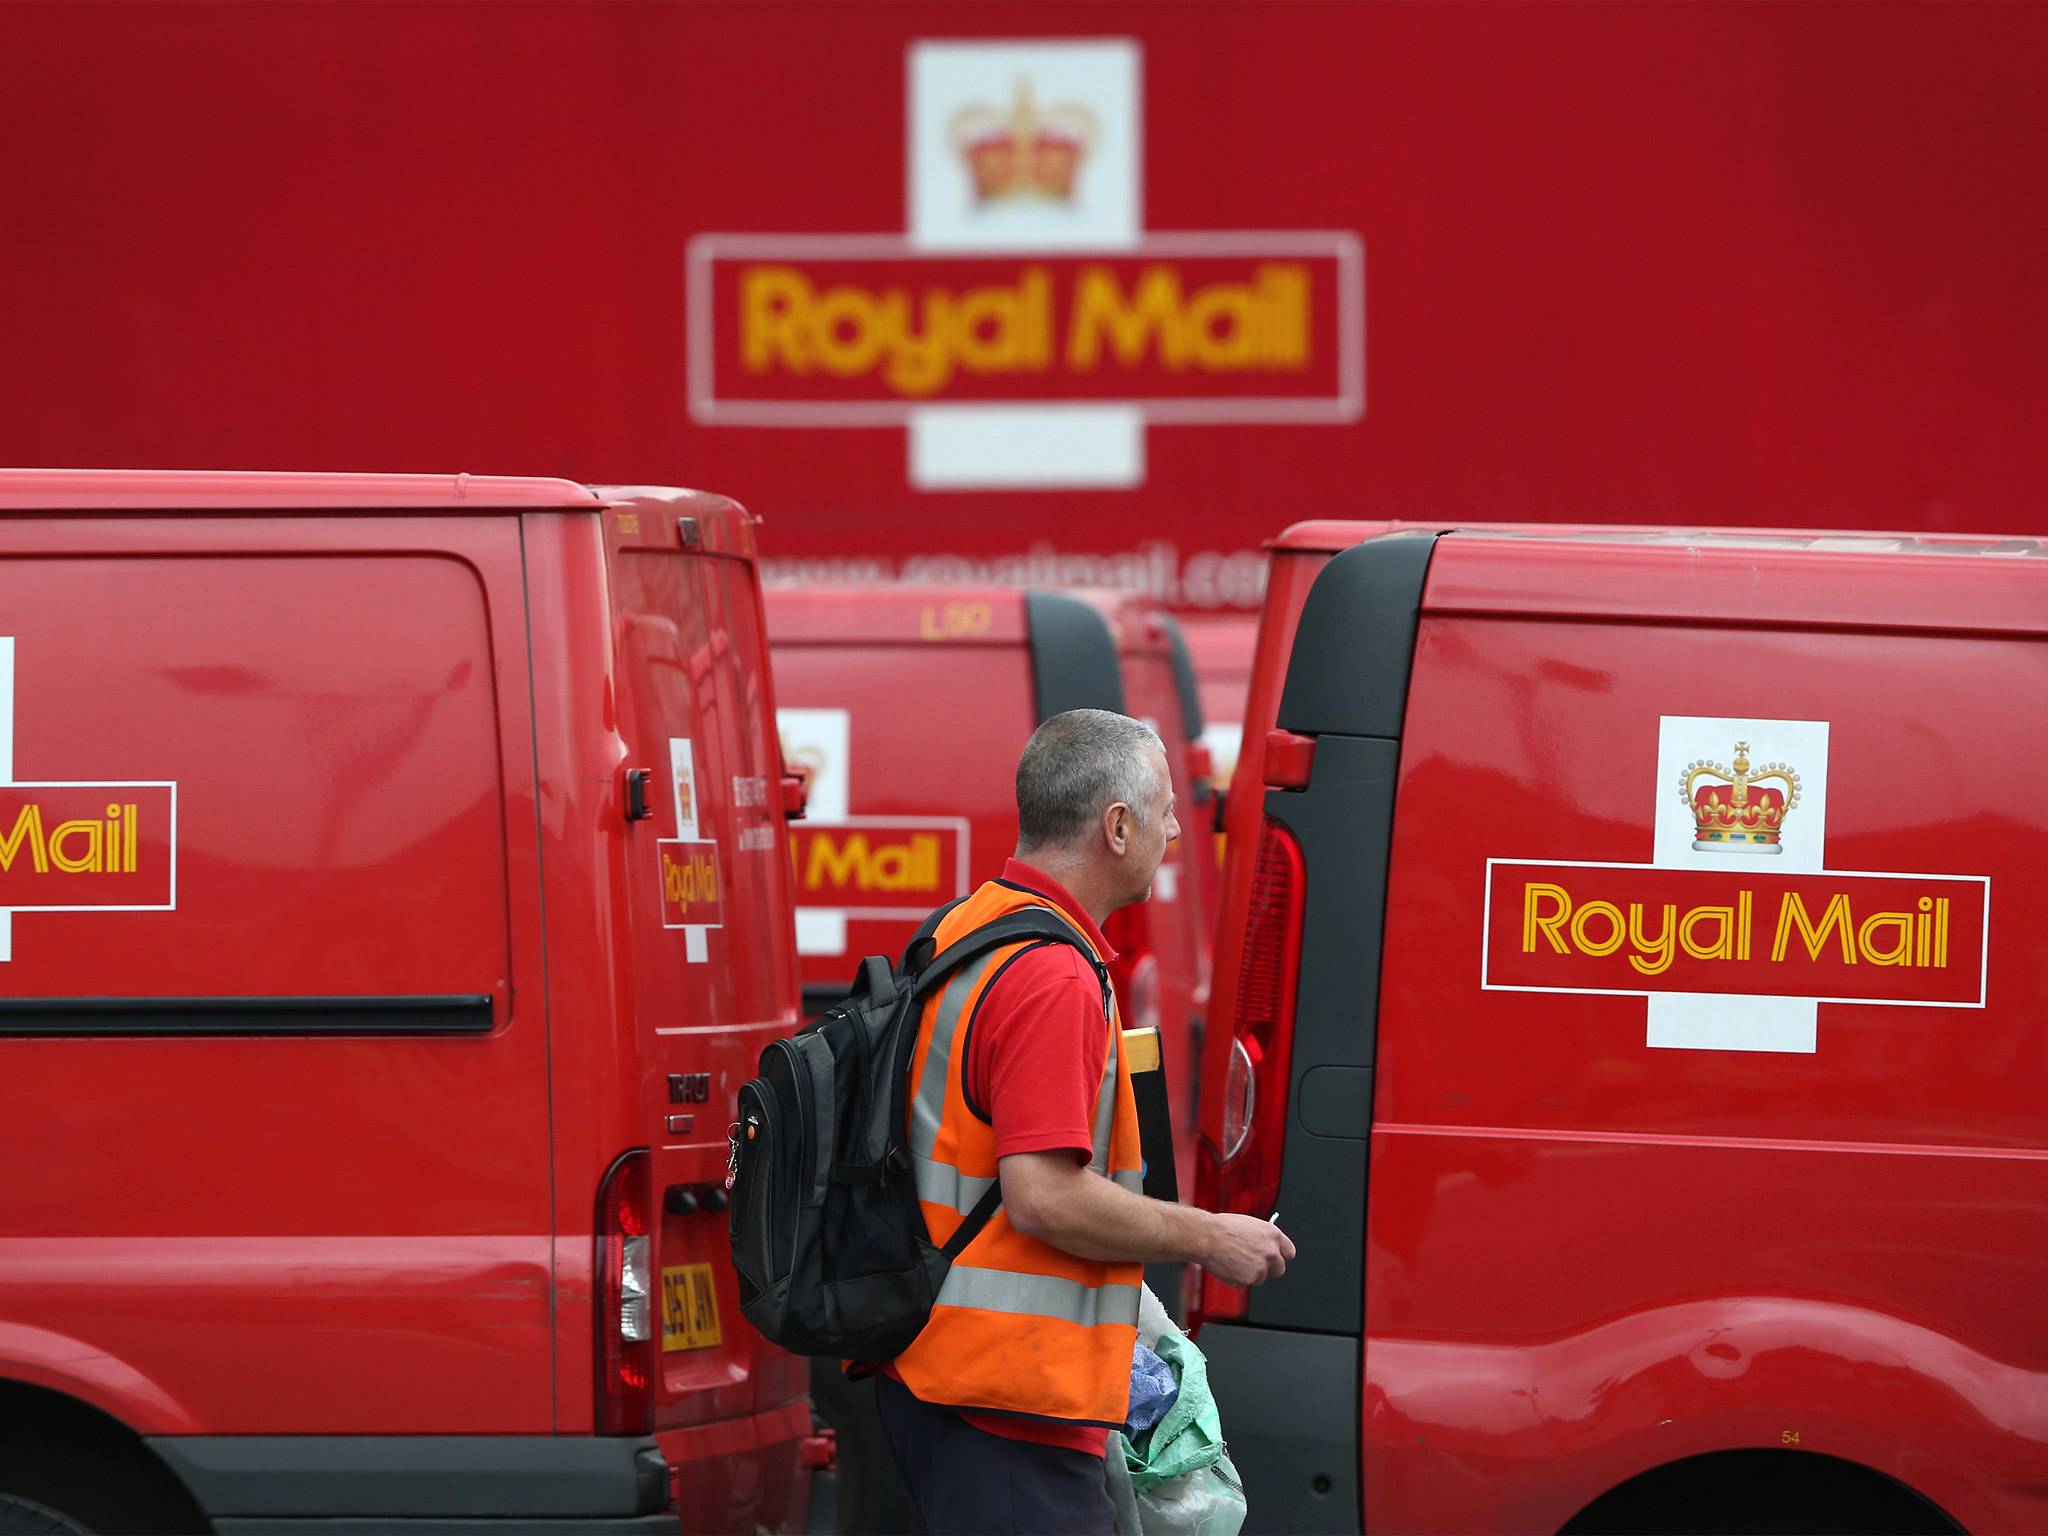 Goldman Sachs priced the Royal Mail at £3.30-a-share when it floated last month